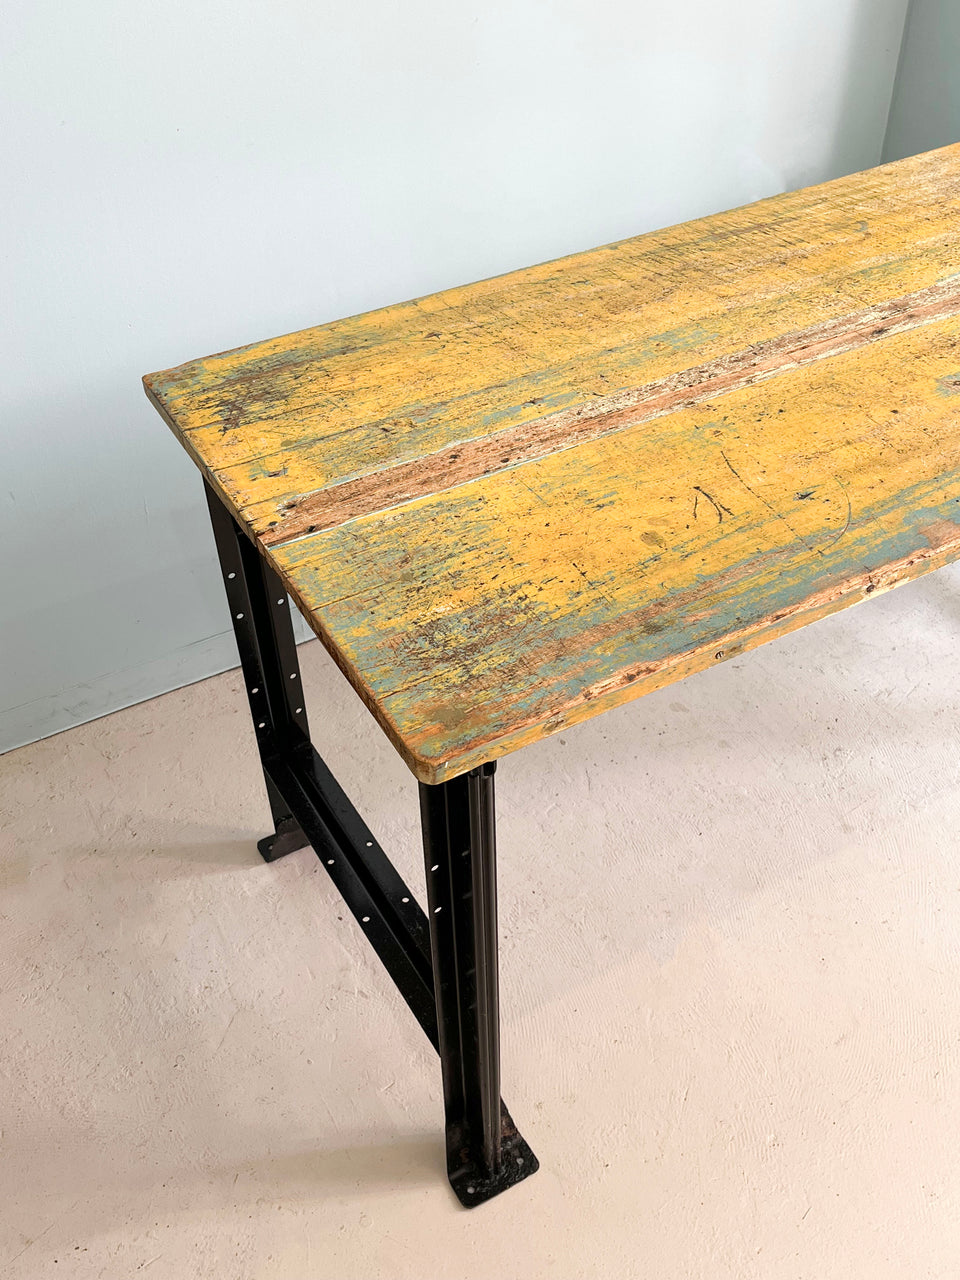 Remake Work Table Made of Old Material/リメイクワークテーブル 作業台 古材 ボート材